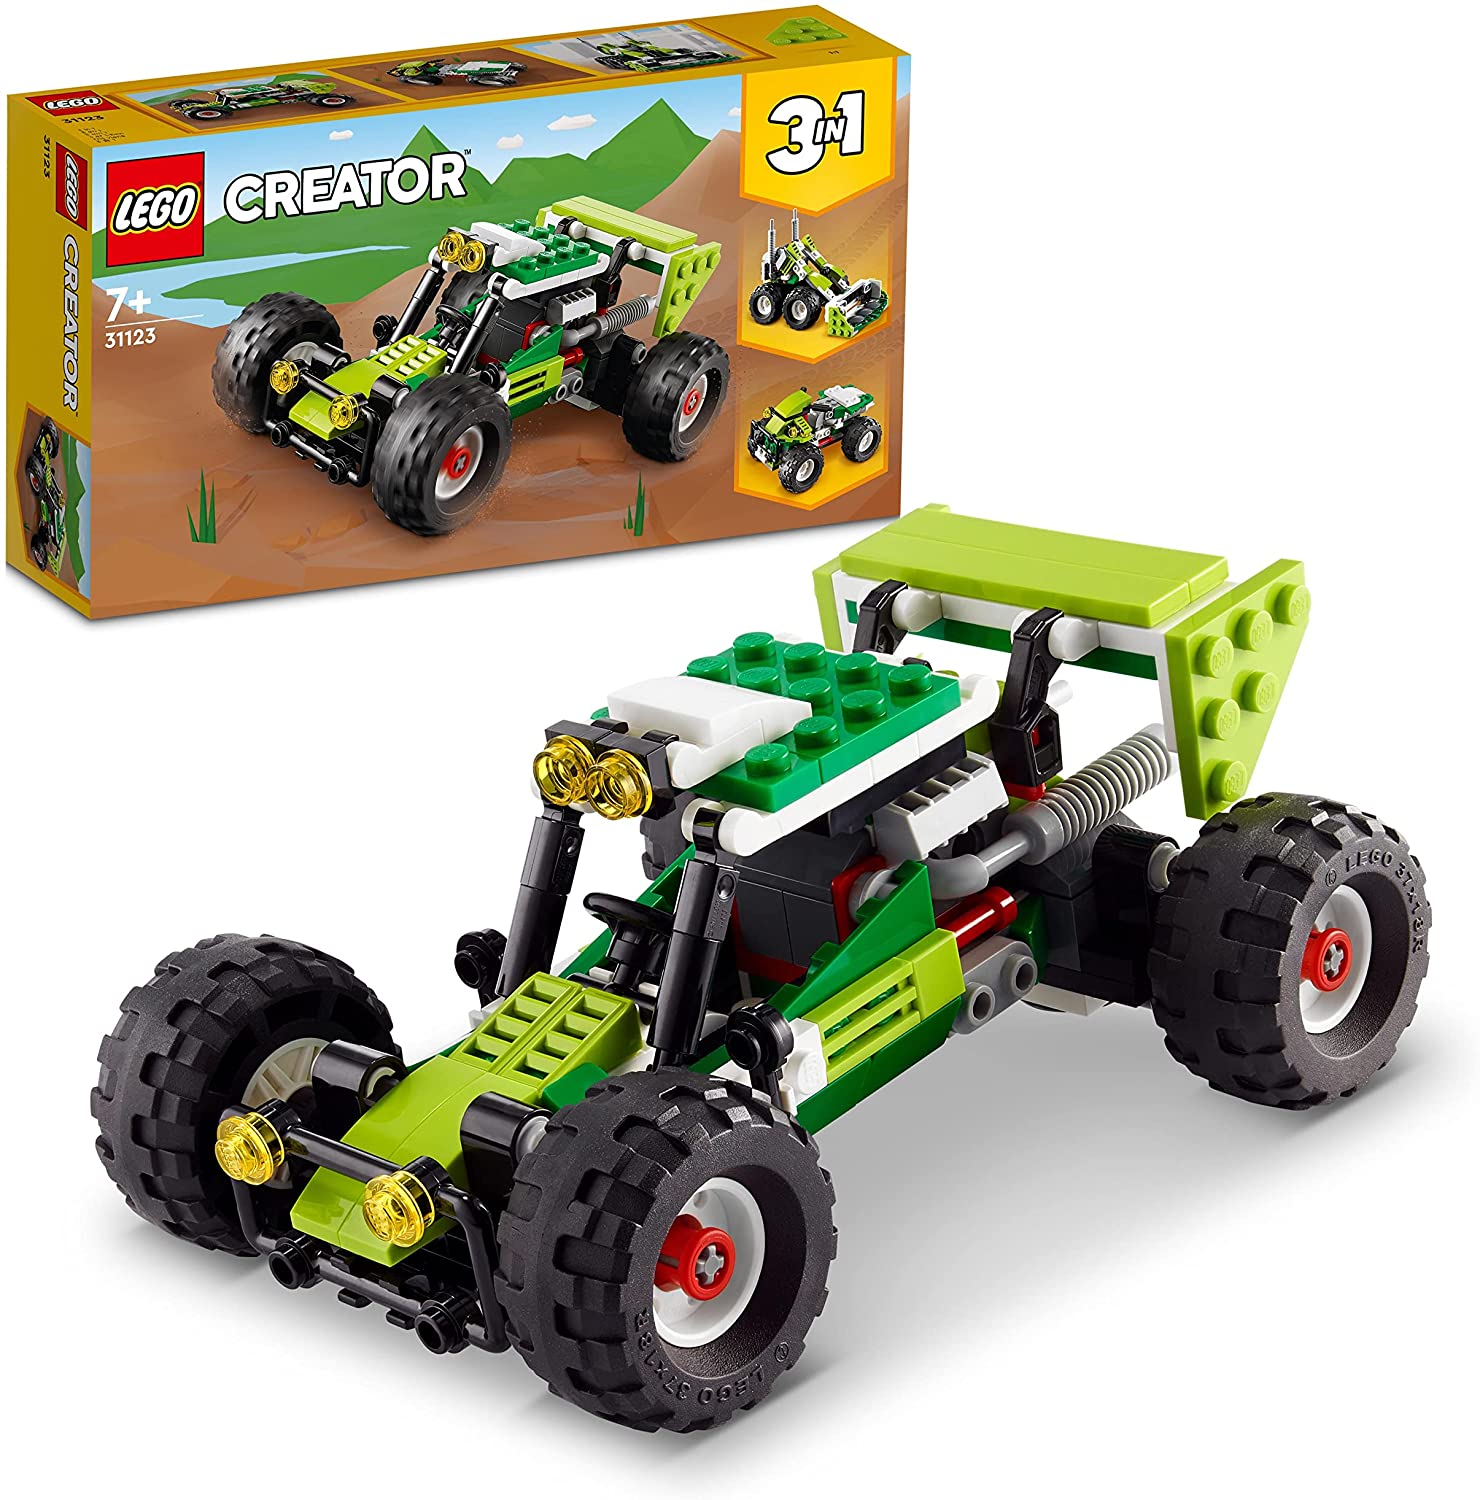 LEGO 31123 Creator 3-in-1 Off-Road Buggy, Quad, Compact Loader, Toy Vehicle